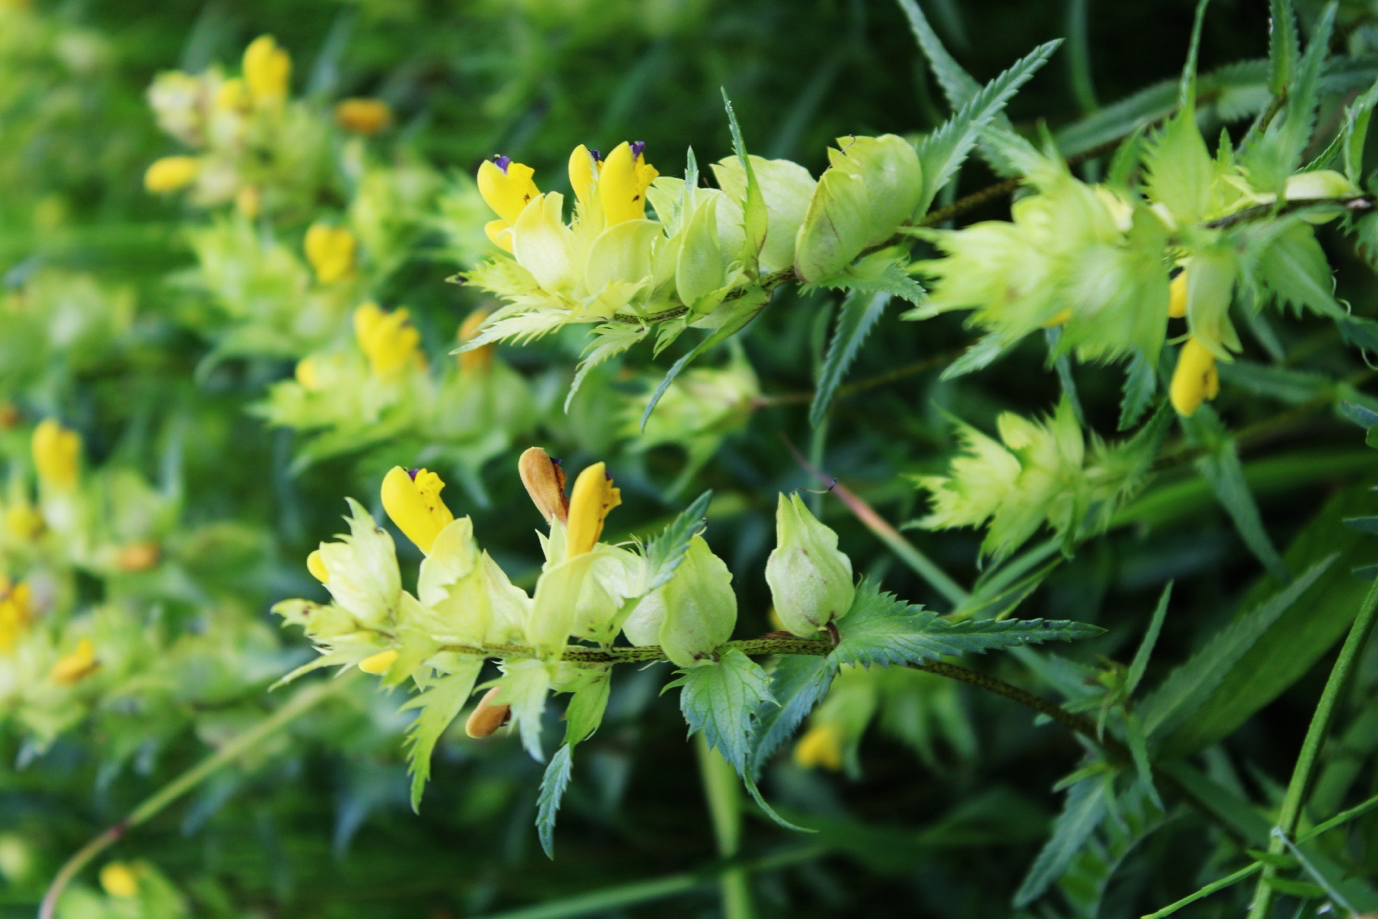 Series: Flower hunting – the greater yellow-rattle